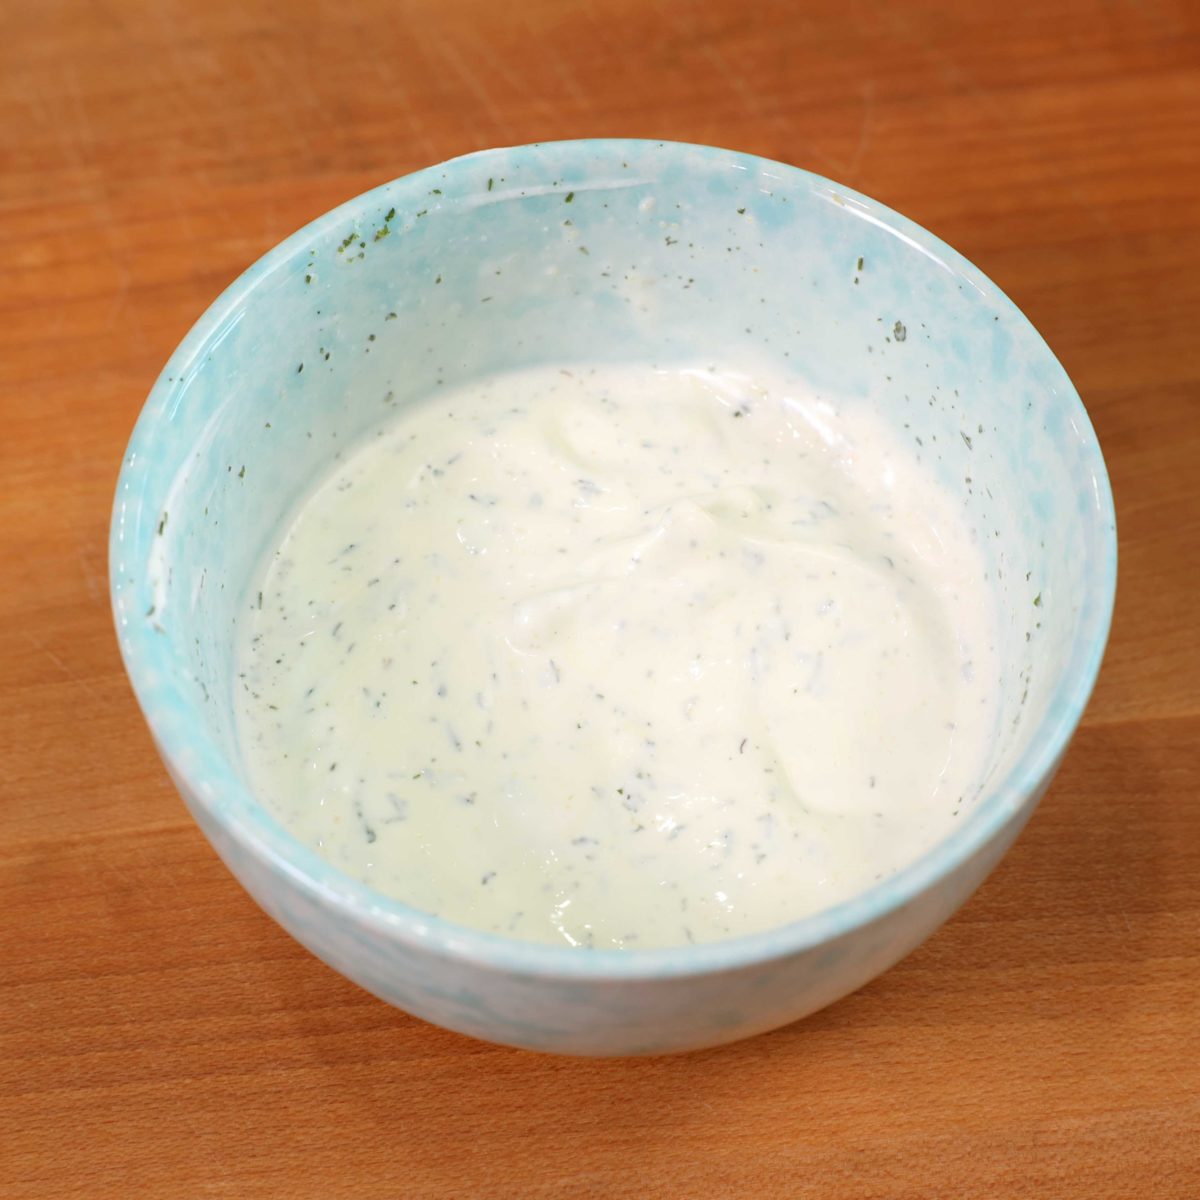 a small amount of ranch dressing in a blue bowl on top of a wooden cutting board.